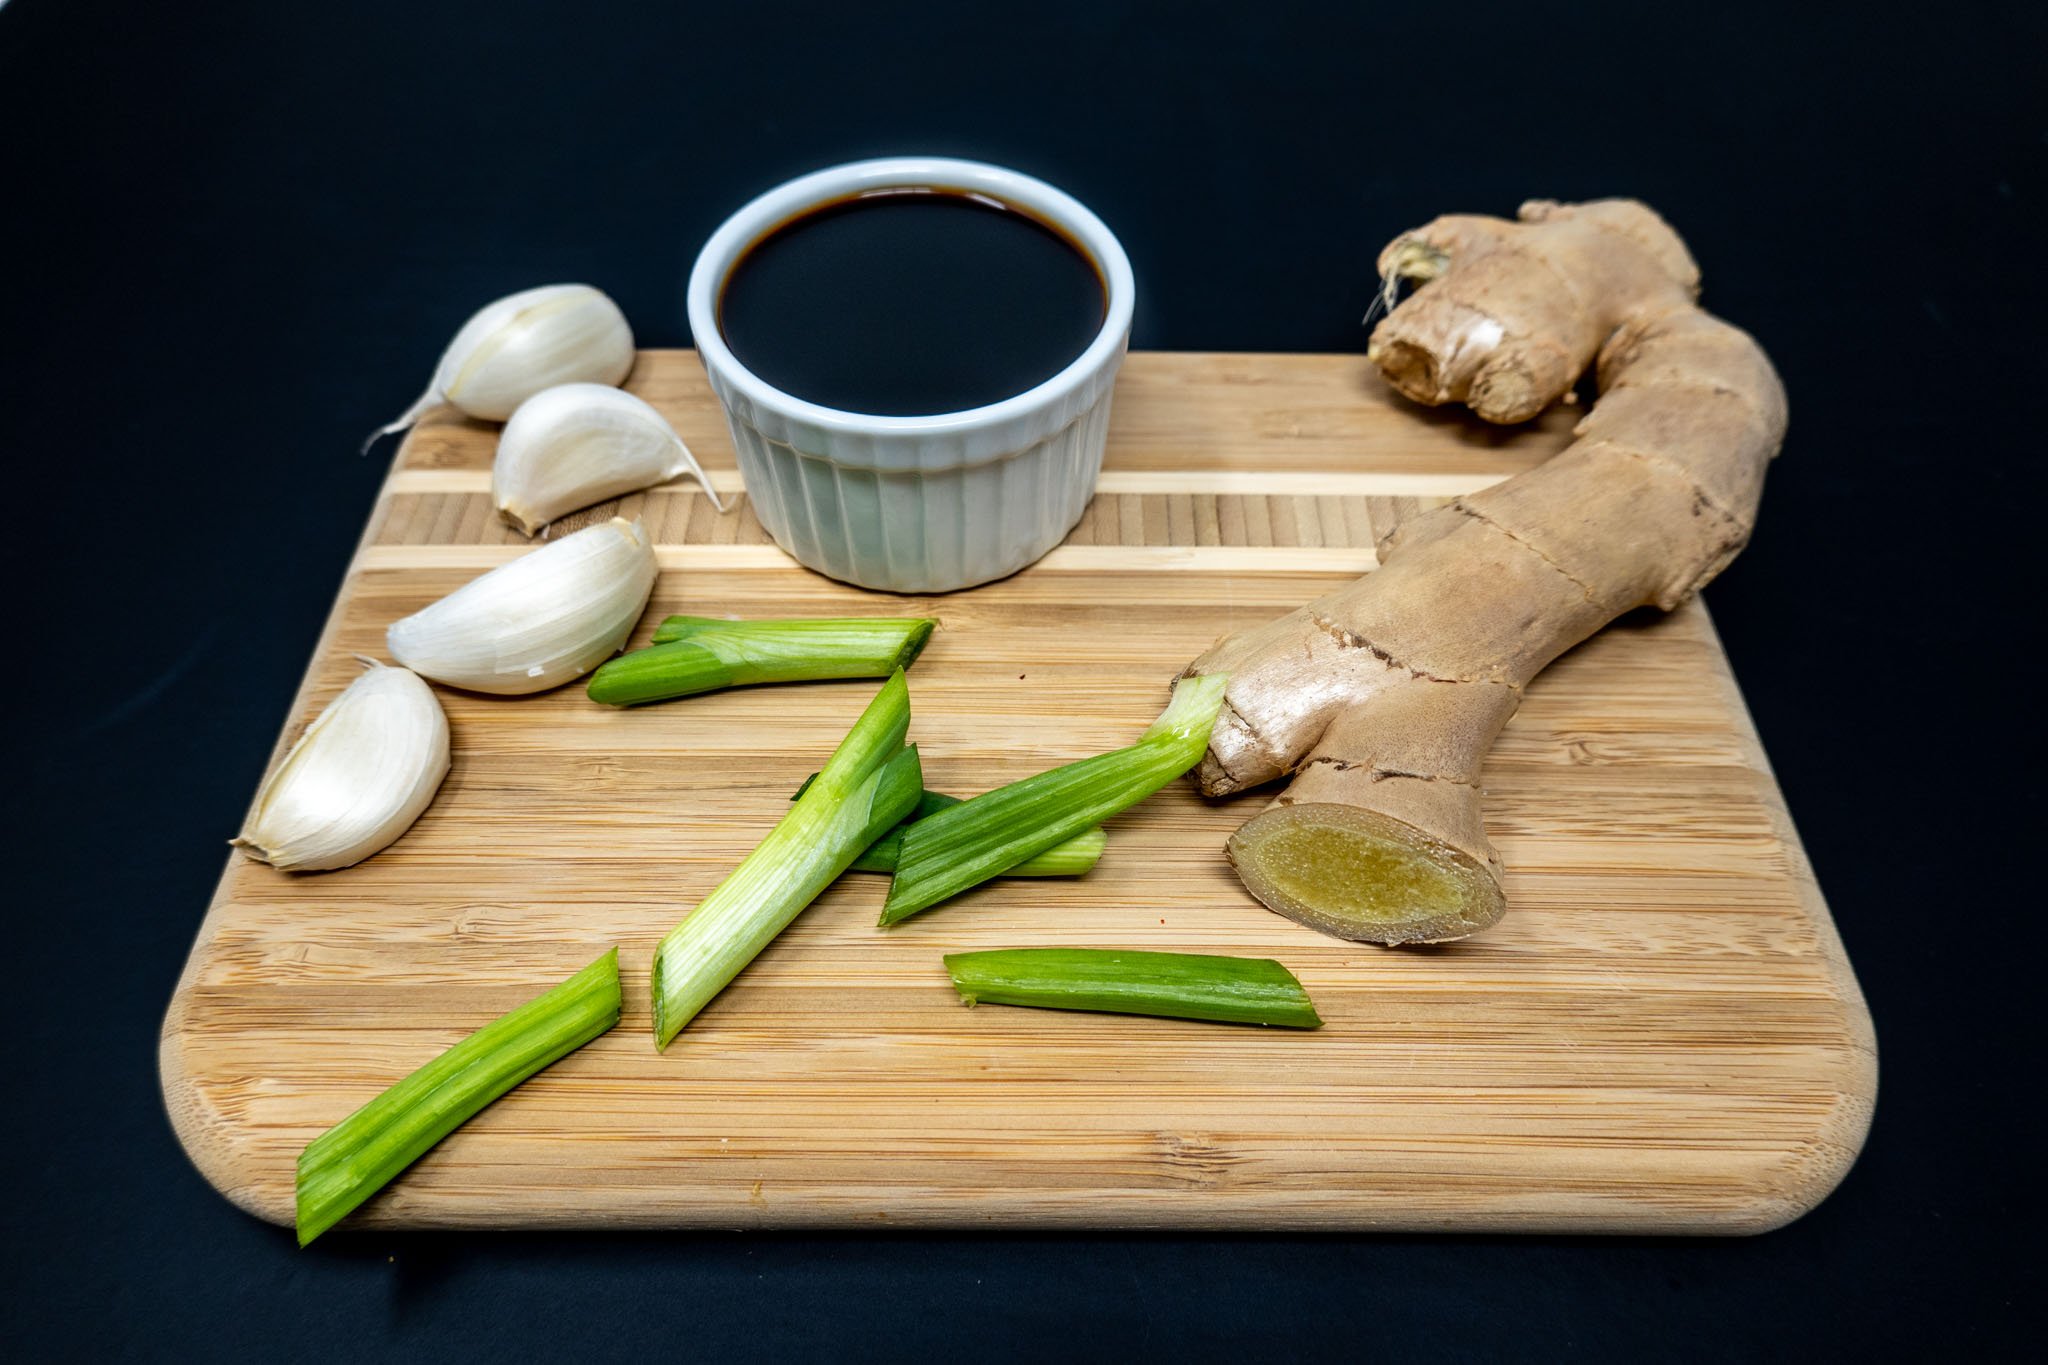 Garlic cloves, scallions, ginger, and soy sauce on cutting board